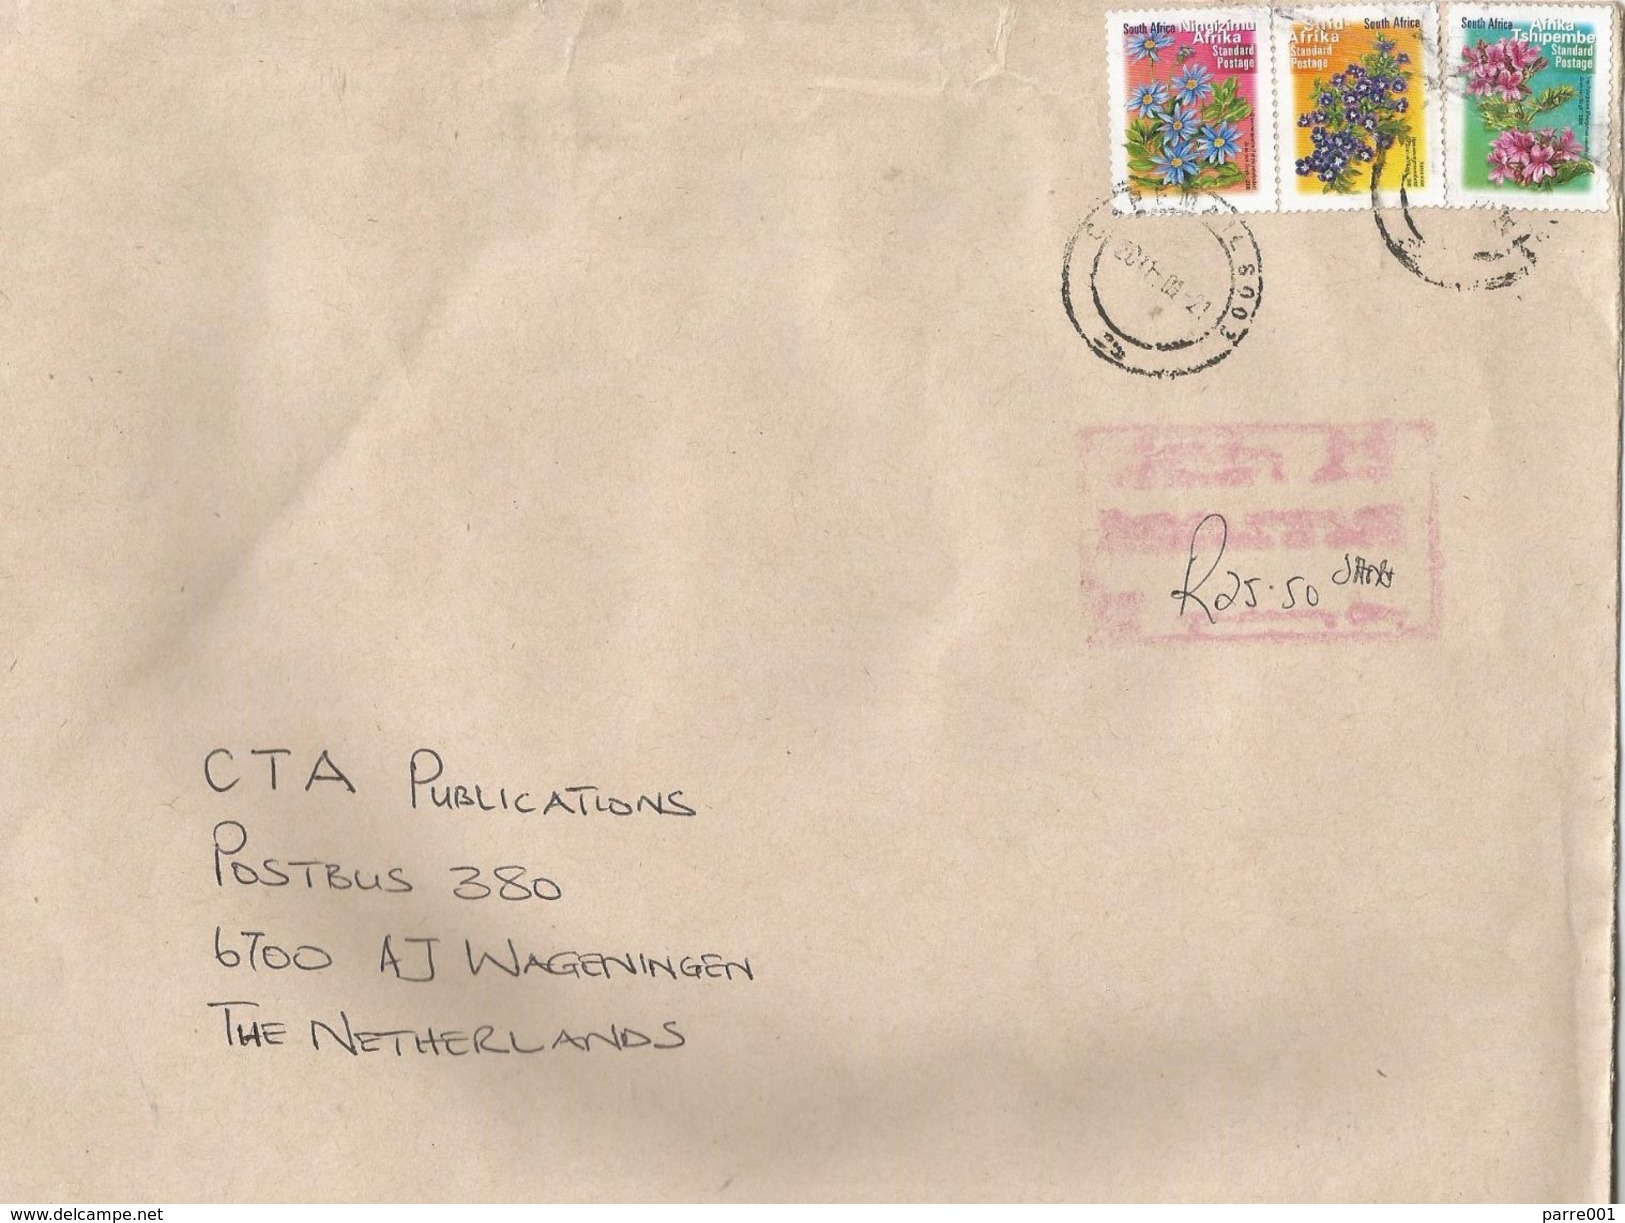 South Africa 2011 Cape Flowers Postage Due Charge Cover - Timbres-taxe